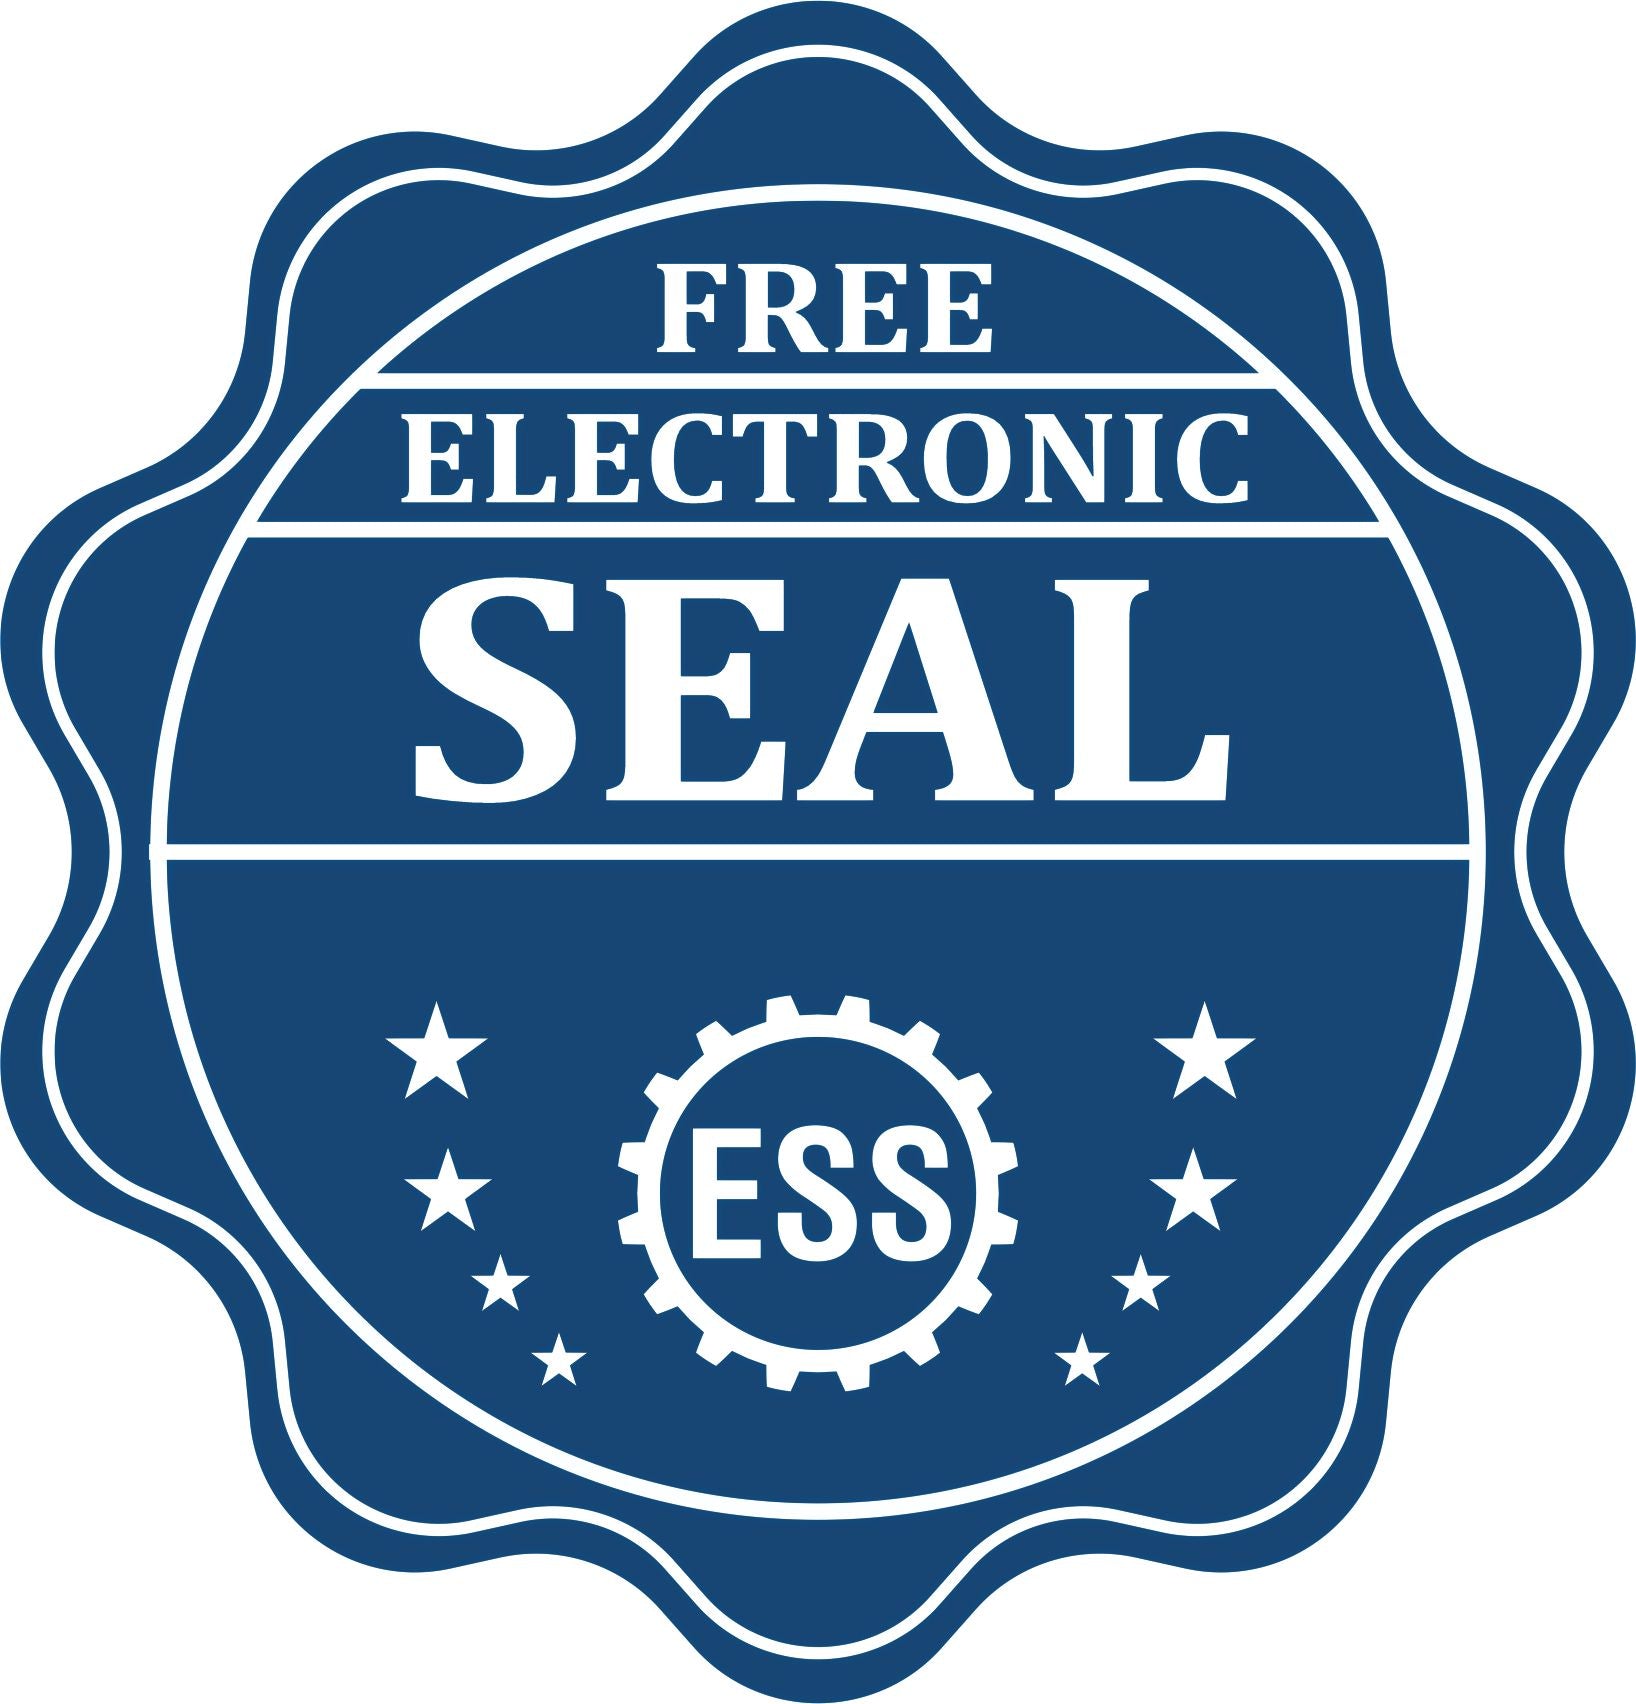 A badge showing a free electronic seal for the Extended Long Reach Connecticut Surveyor Embosser with stars and the ESS gear on the emblem.